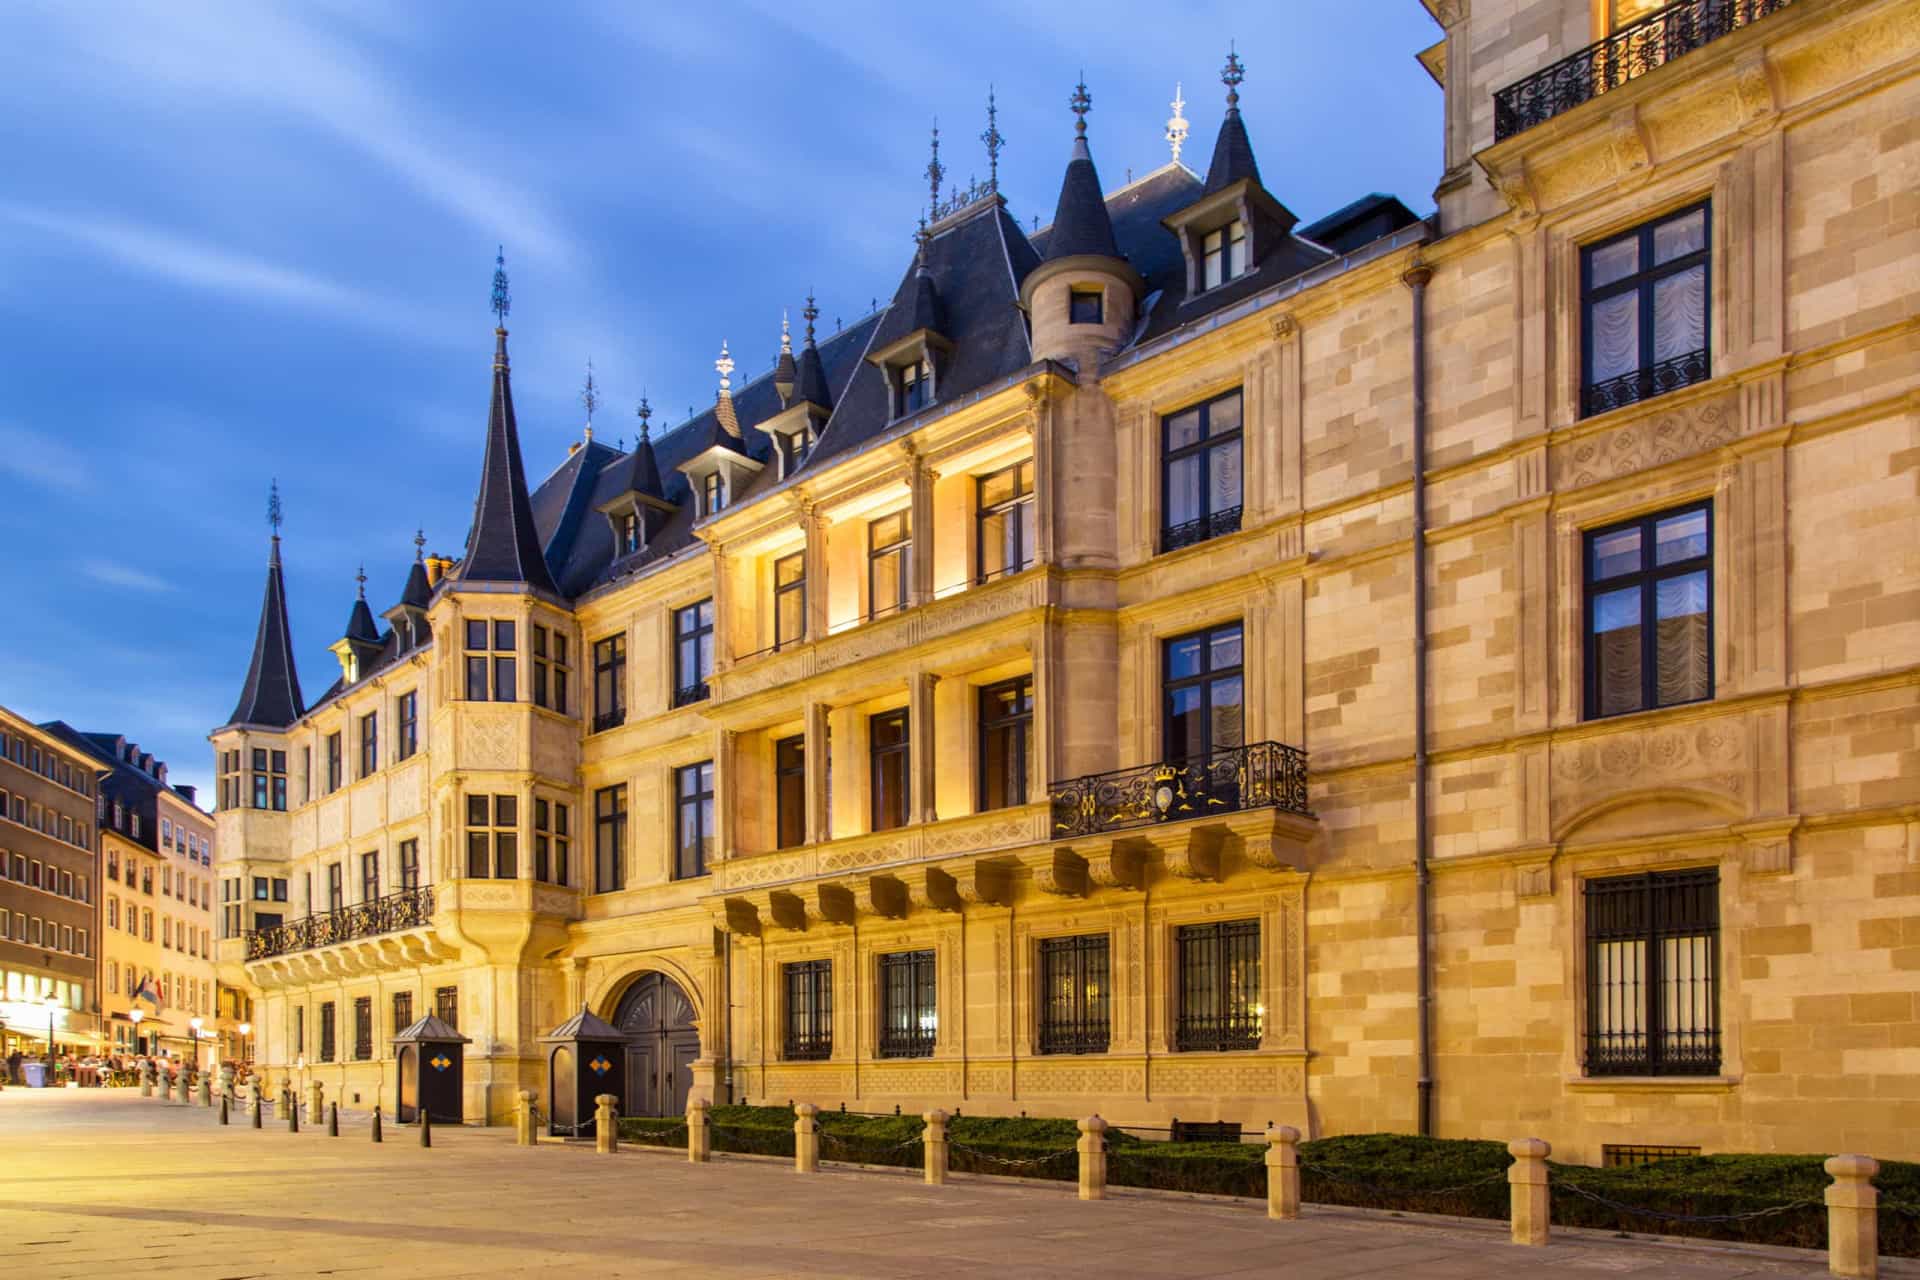 <p>This splendid honey-hued Renaissance building serves as the official city residence of the Grand Duke of Luxembourg, the country's reigning monarch. Dating back to 1582, the palace is a city-center landmark and can be visited by the public on special organized tours made available from mid-July to the first week of September.</p>